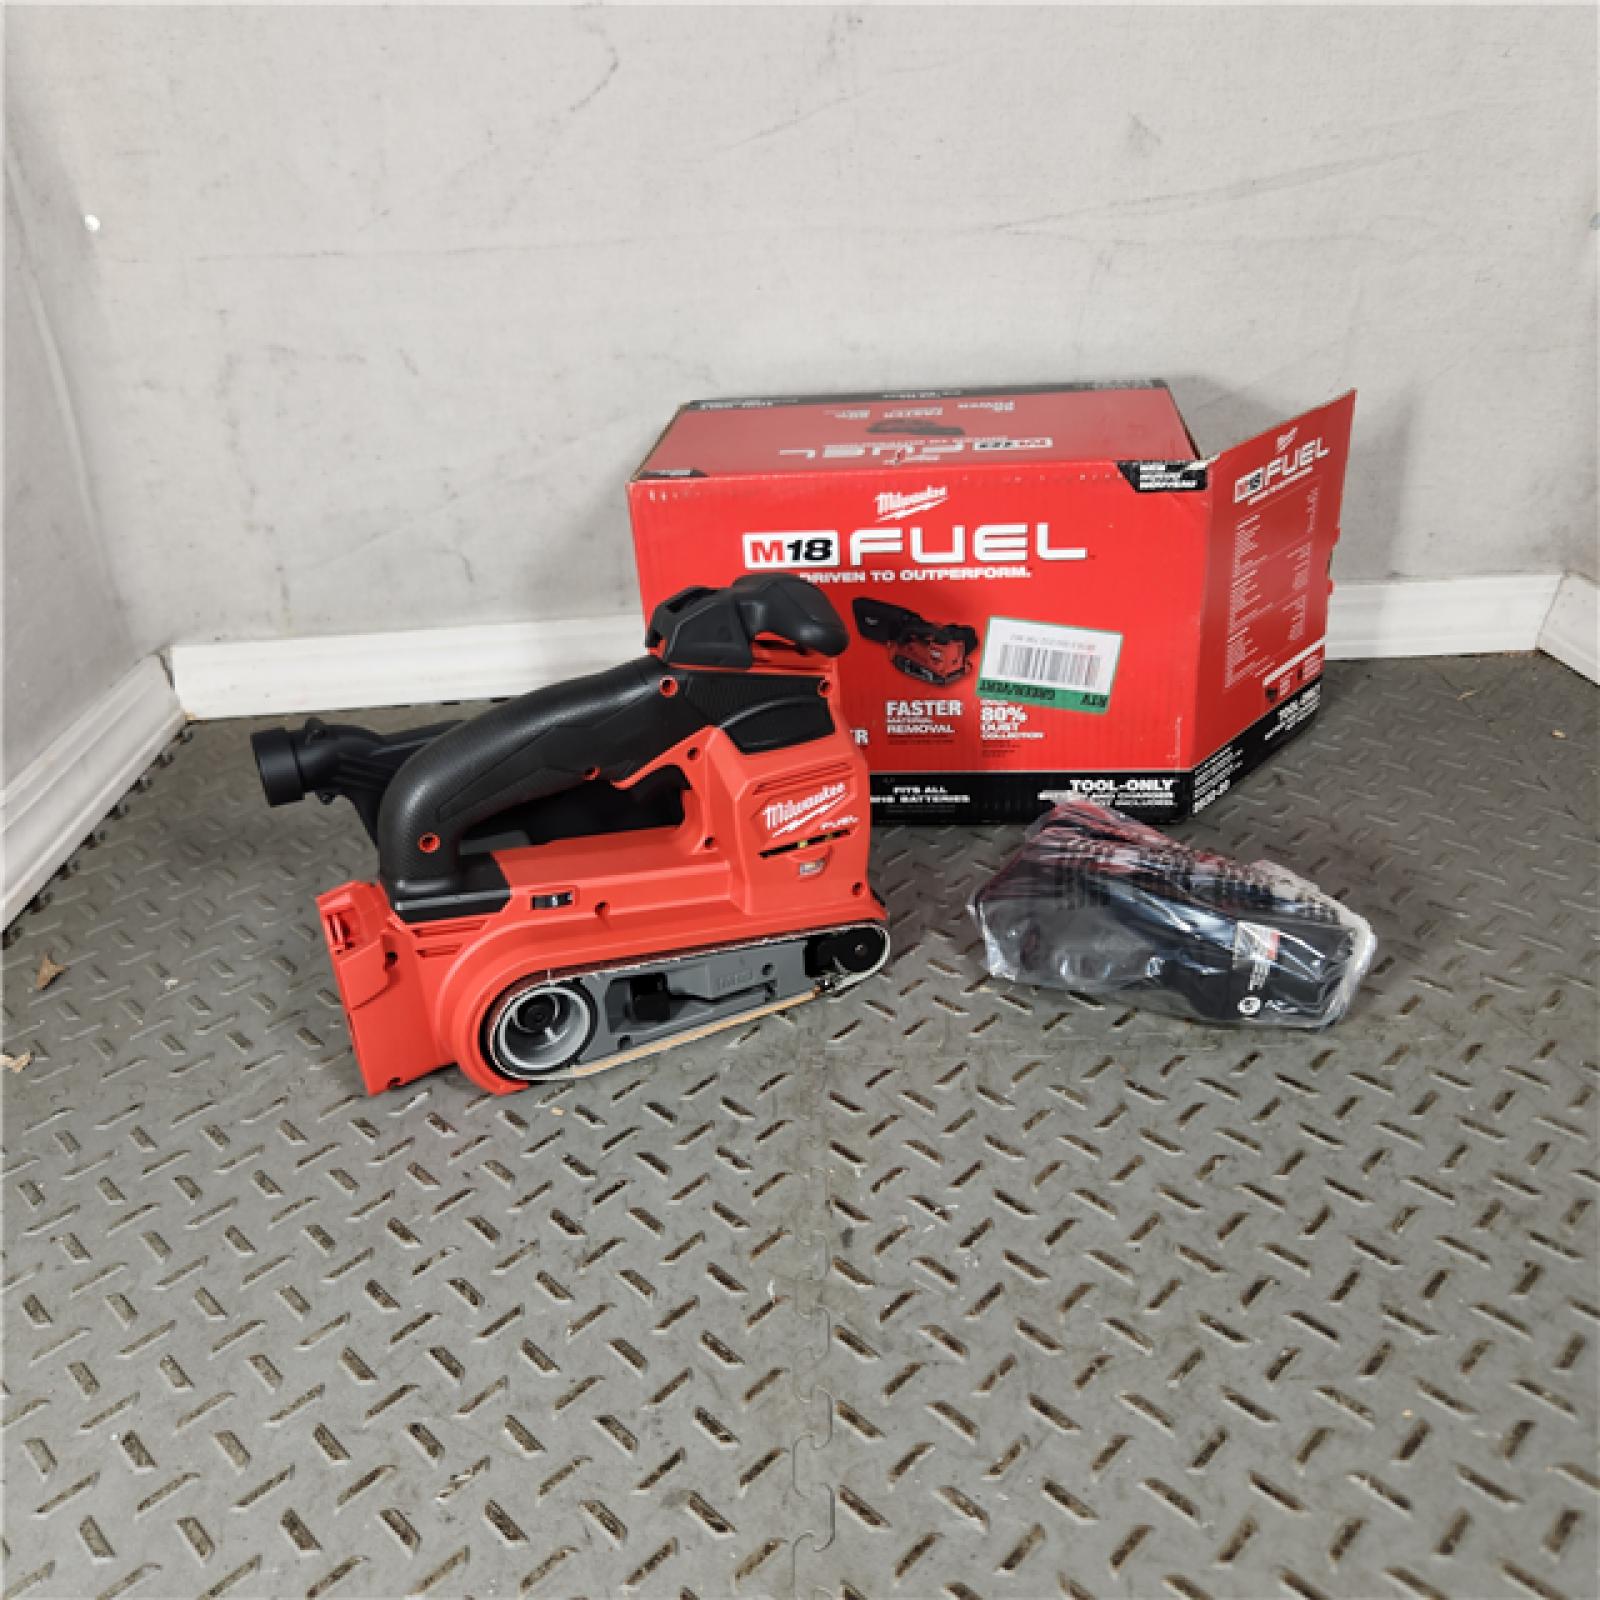 Houston Location - As-Is Milwaukee M18 Fuel 8 Amps 18 V 3 in. W X 18 in. L Cordless Belt Sander Tool Only - Appears IN GOOD Condition